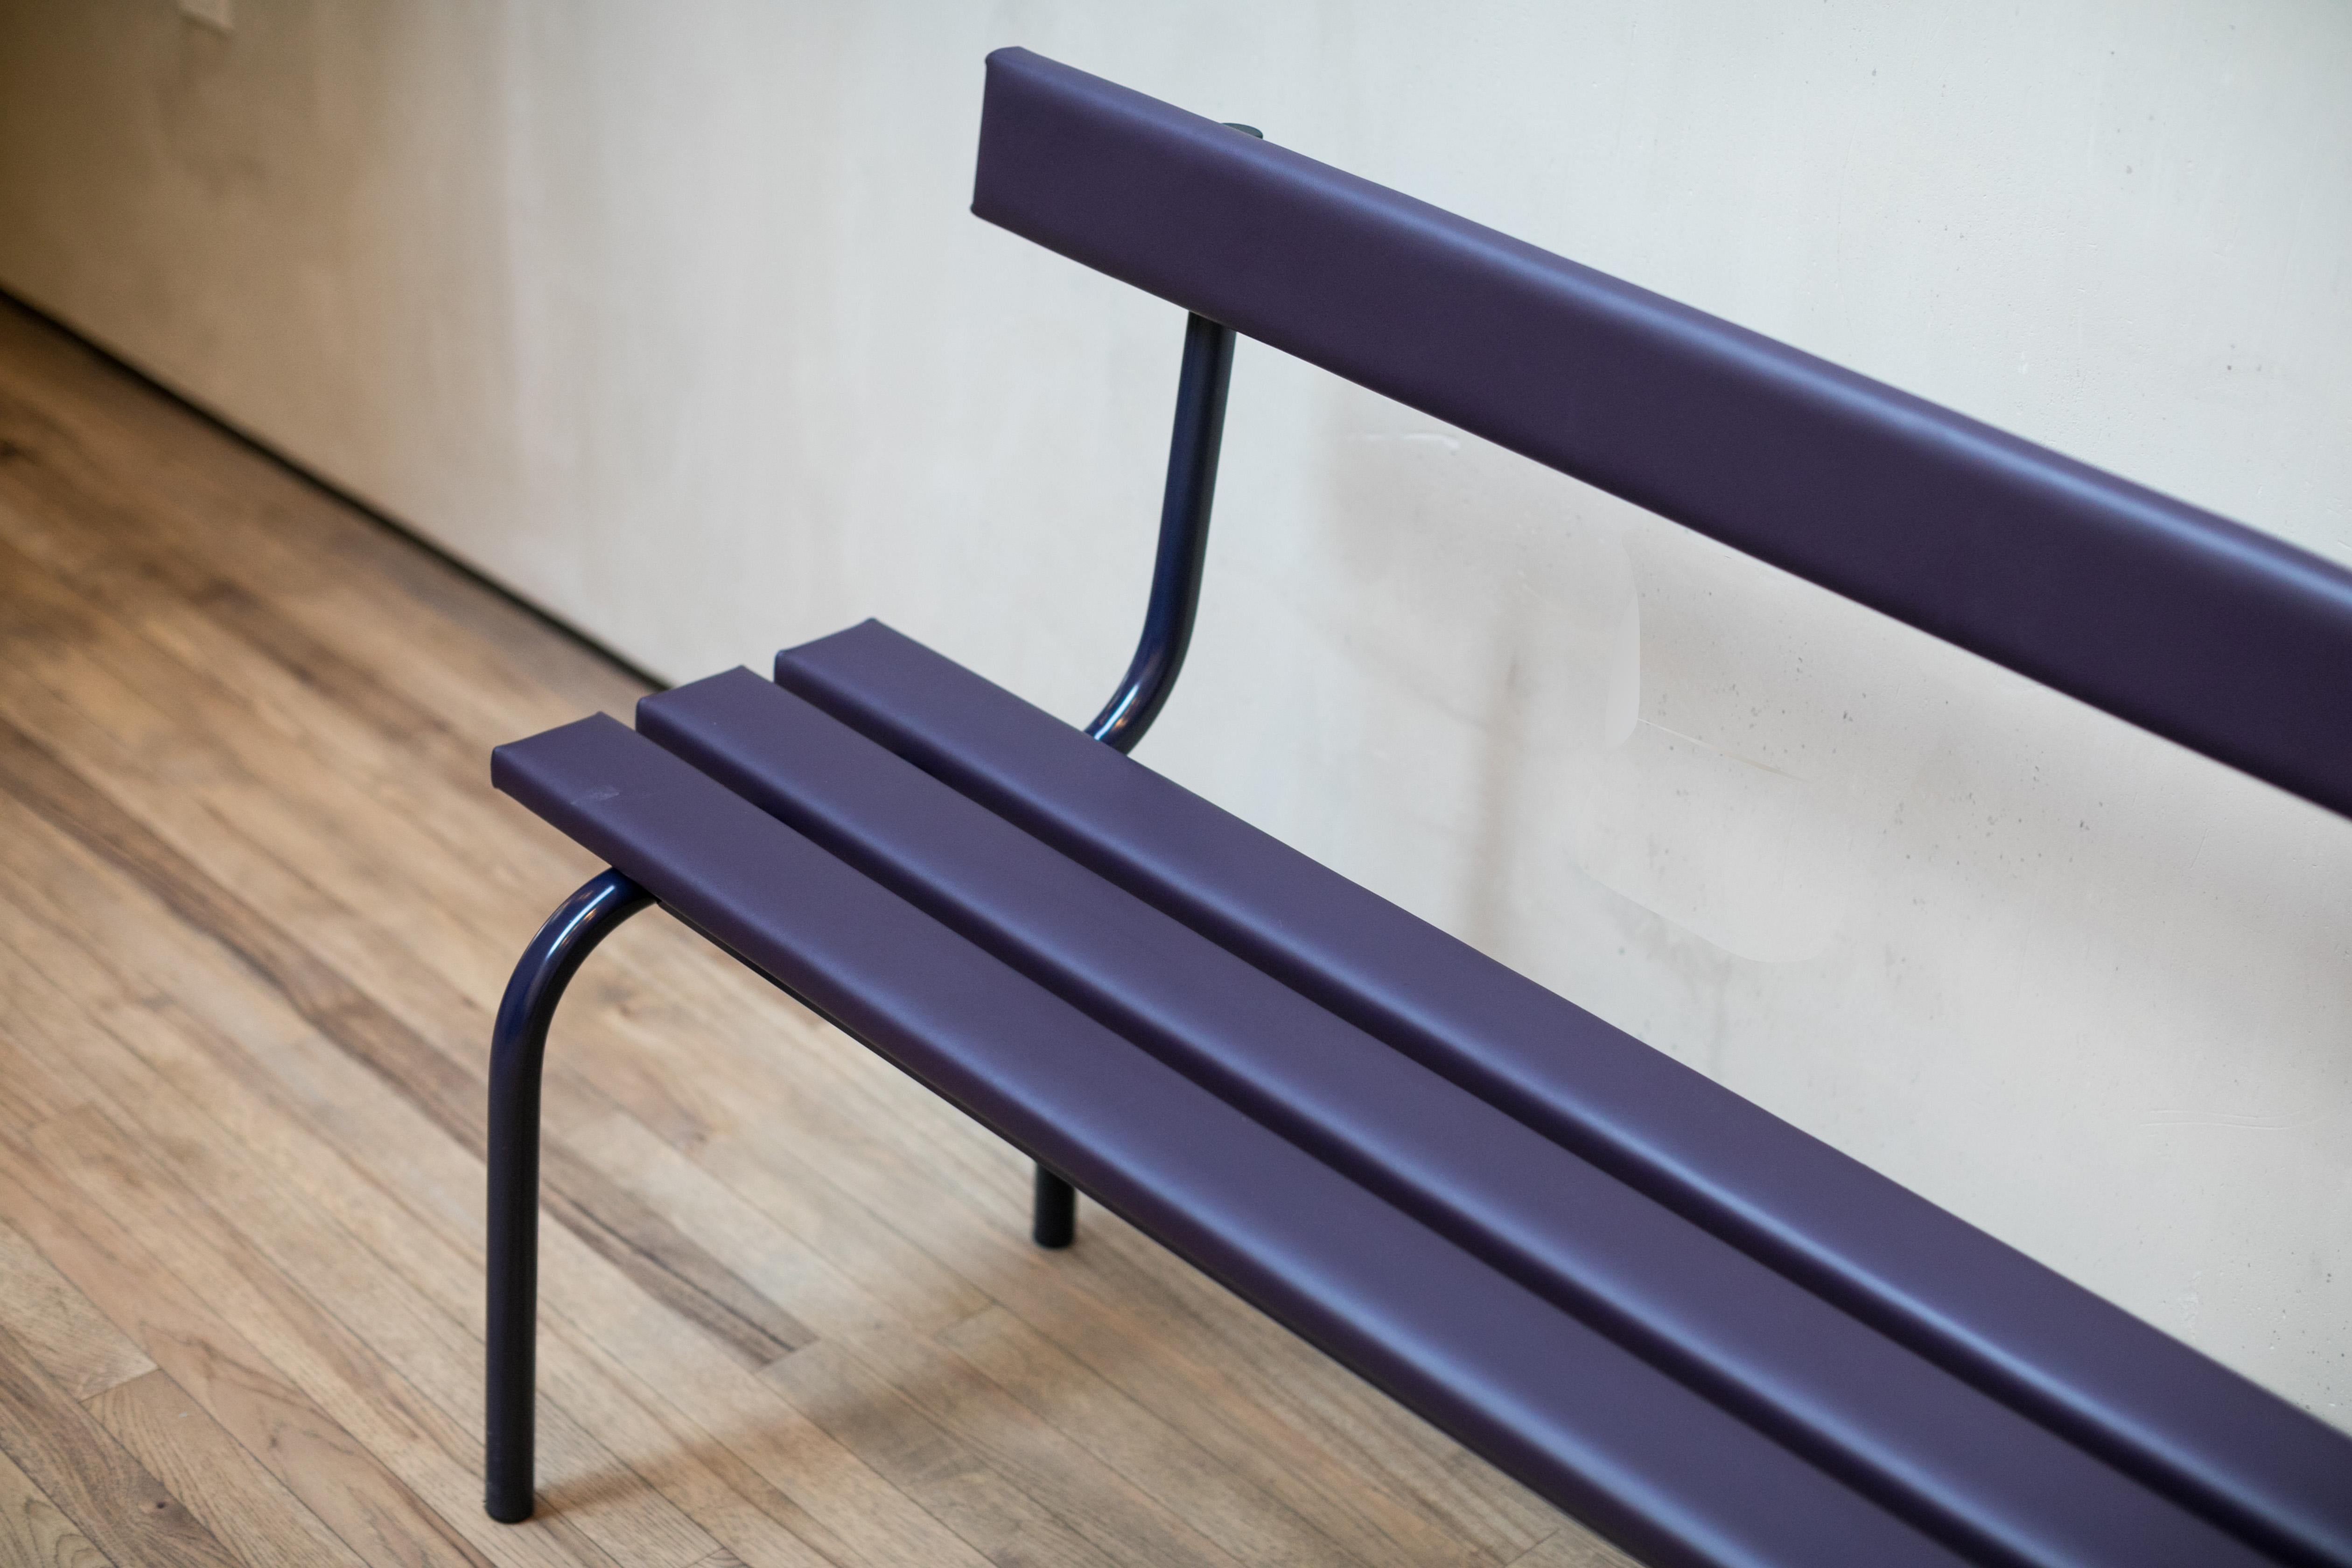 In 2011, commissioned for the first Carven shop in Paris, French designer Eric Chevallier revived one of our fondest childhood memories with a sleek and elegant version of the school bench. Later edited in black without backrest for Karl Lagerfeld.